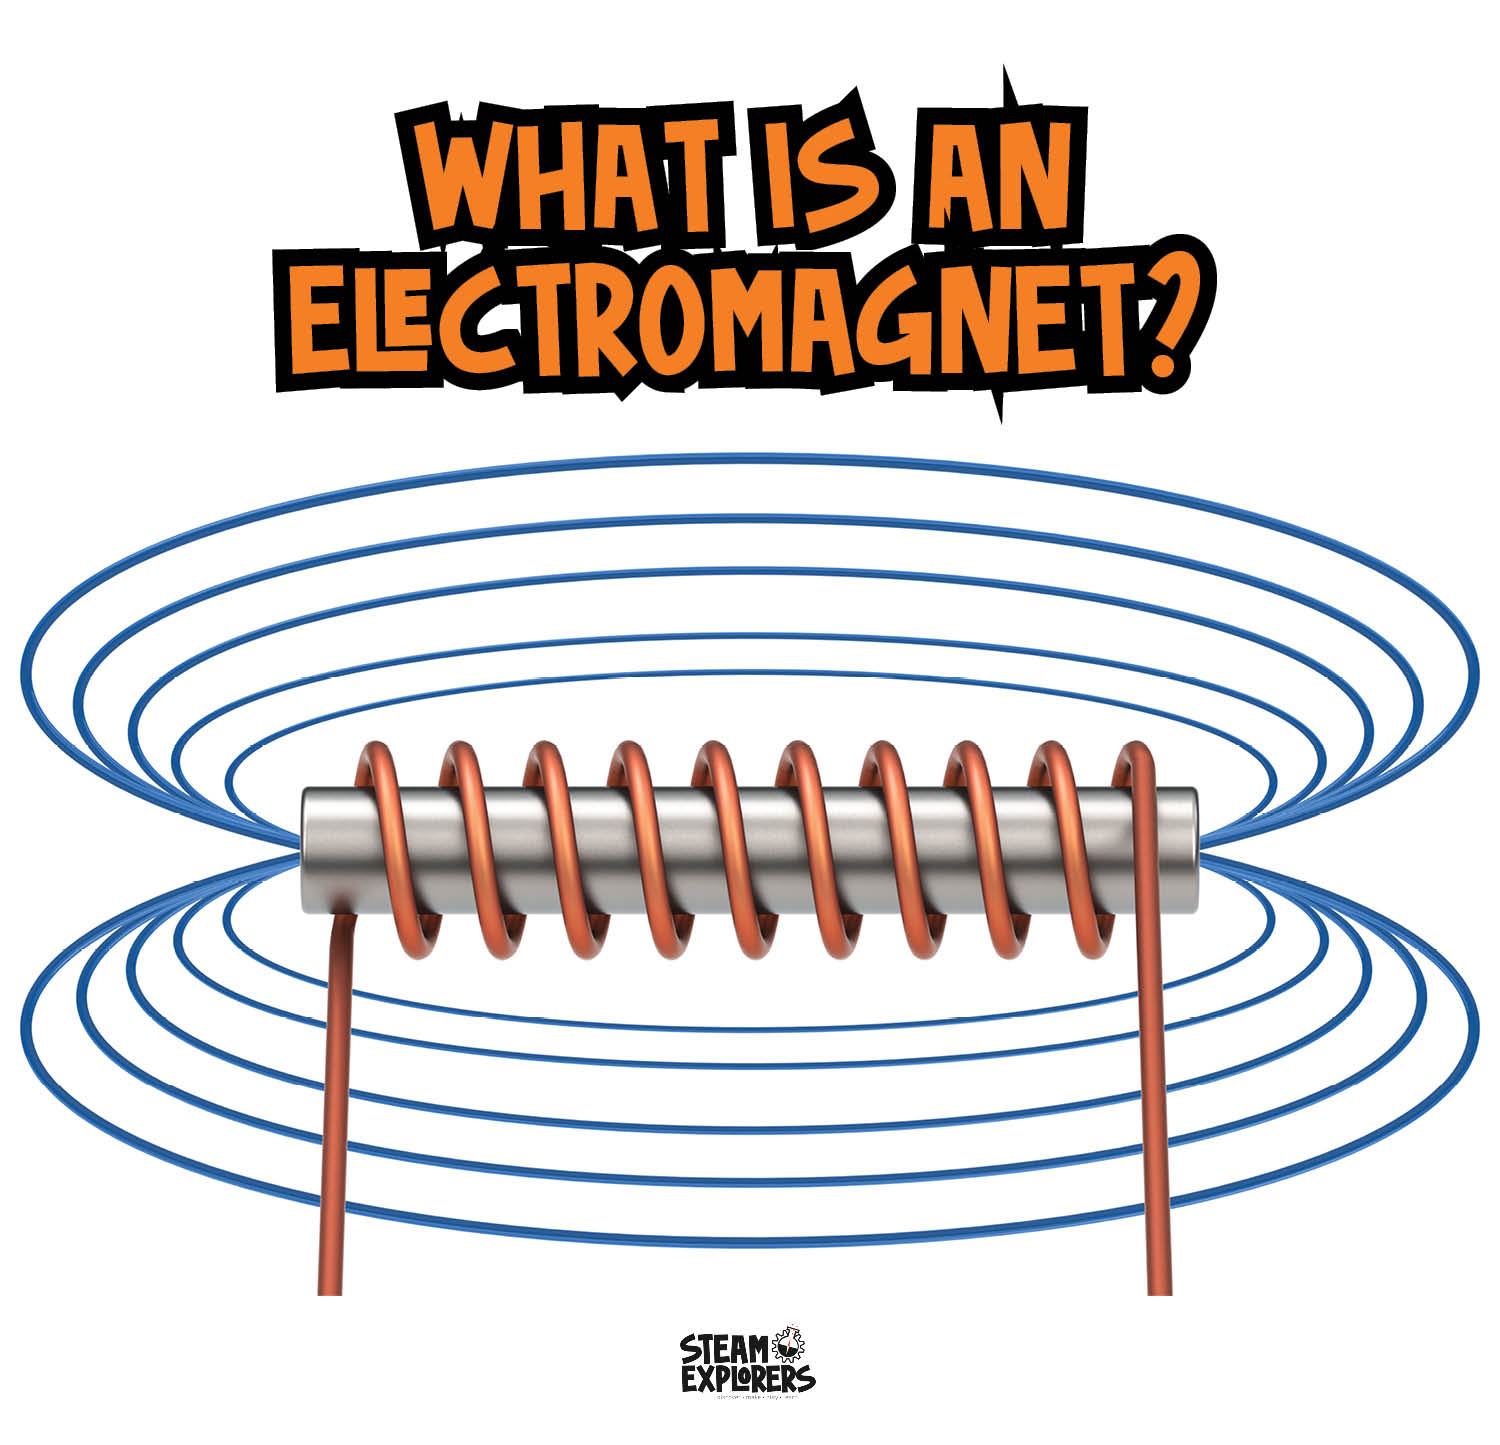 What is an electromagnet (diagram)